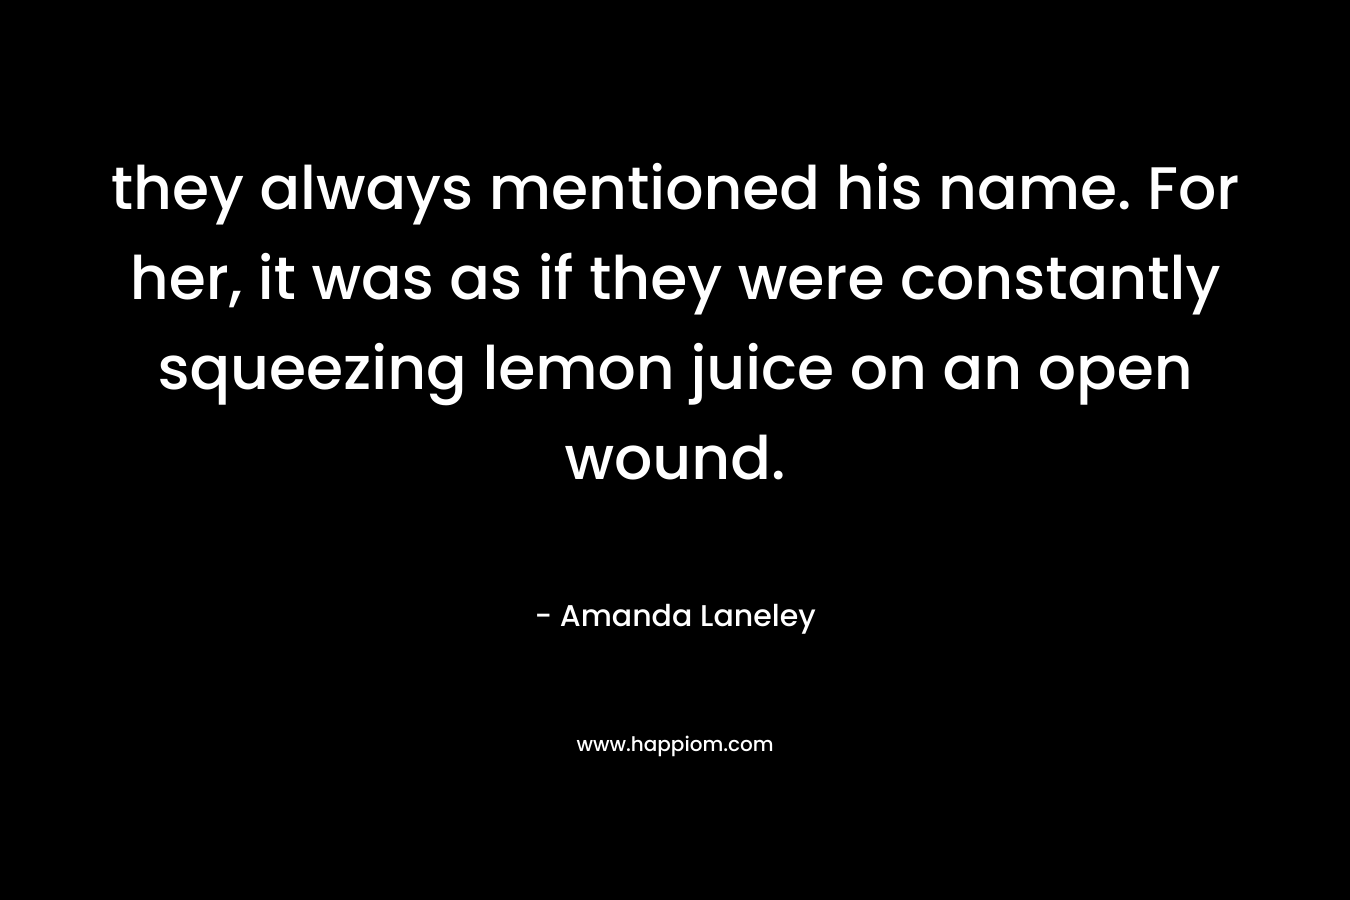 they always mentioned his name. For her, it was as if they were constantly squeezing lemon juice on an open wound. – Amanda Laneley